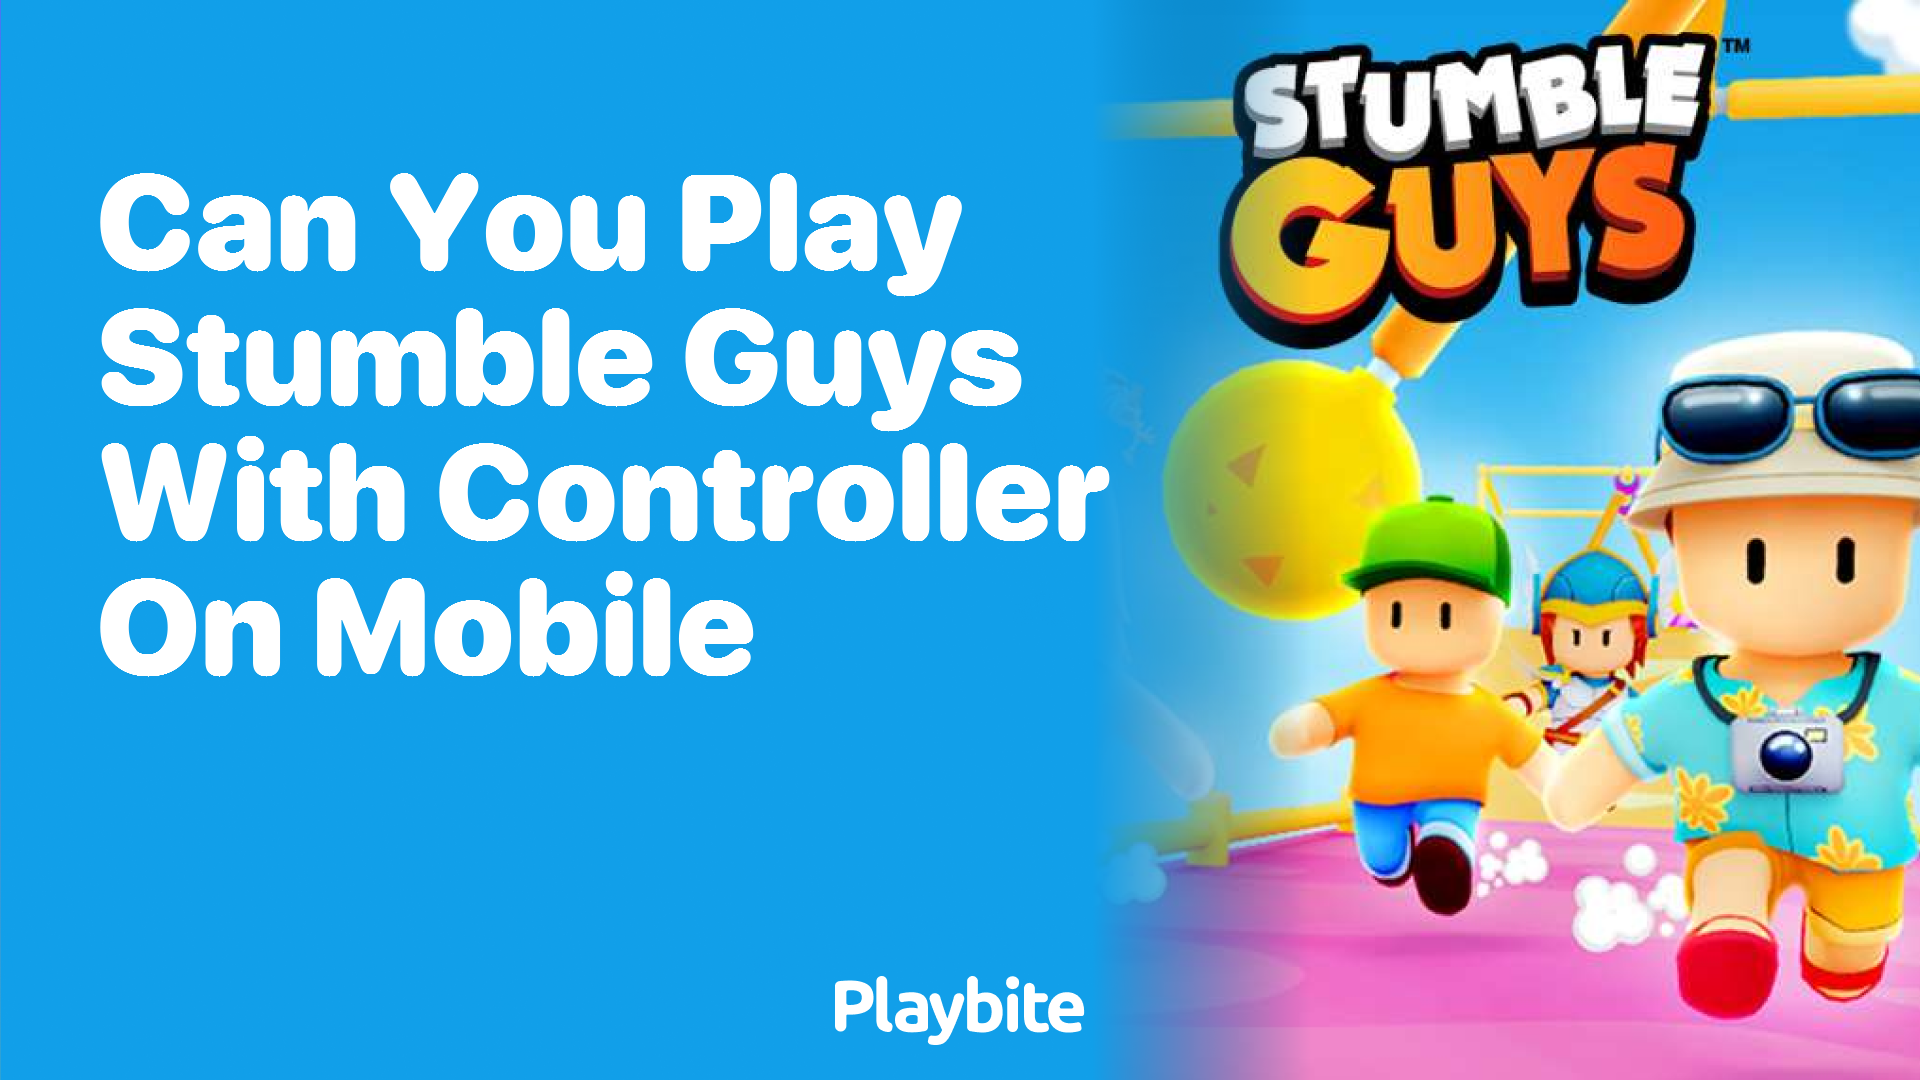 Can You Play Stumble Guys With a Controller on Mobile?